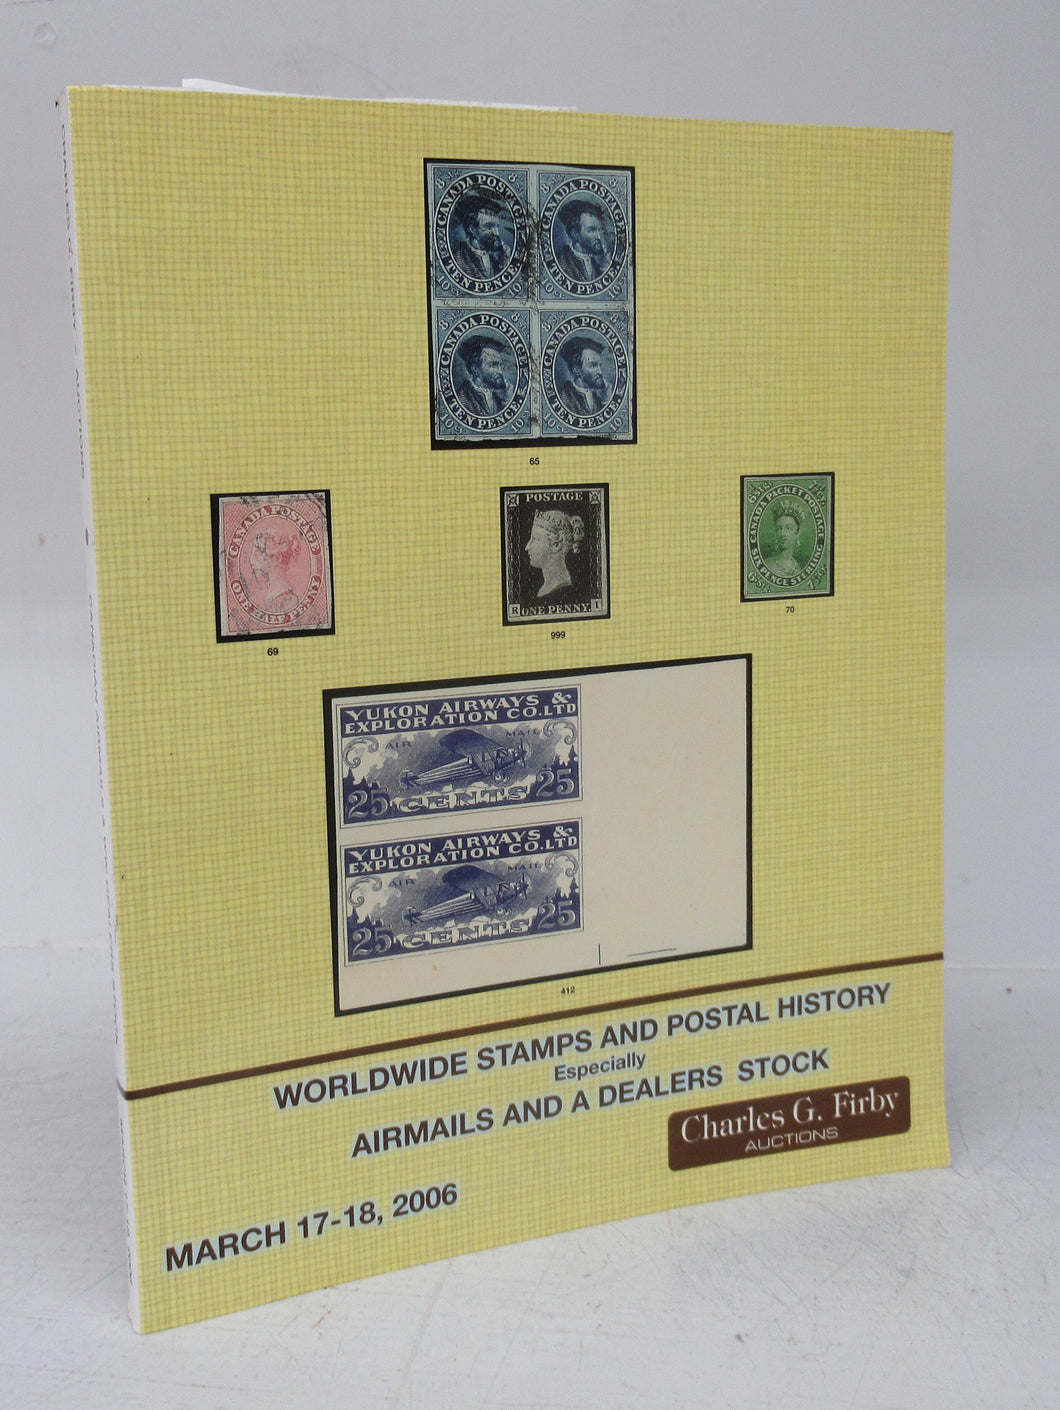 Worldwide Stamps and Postal History, Especially Airmails and a Dealers Stsock